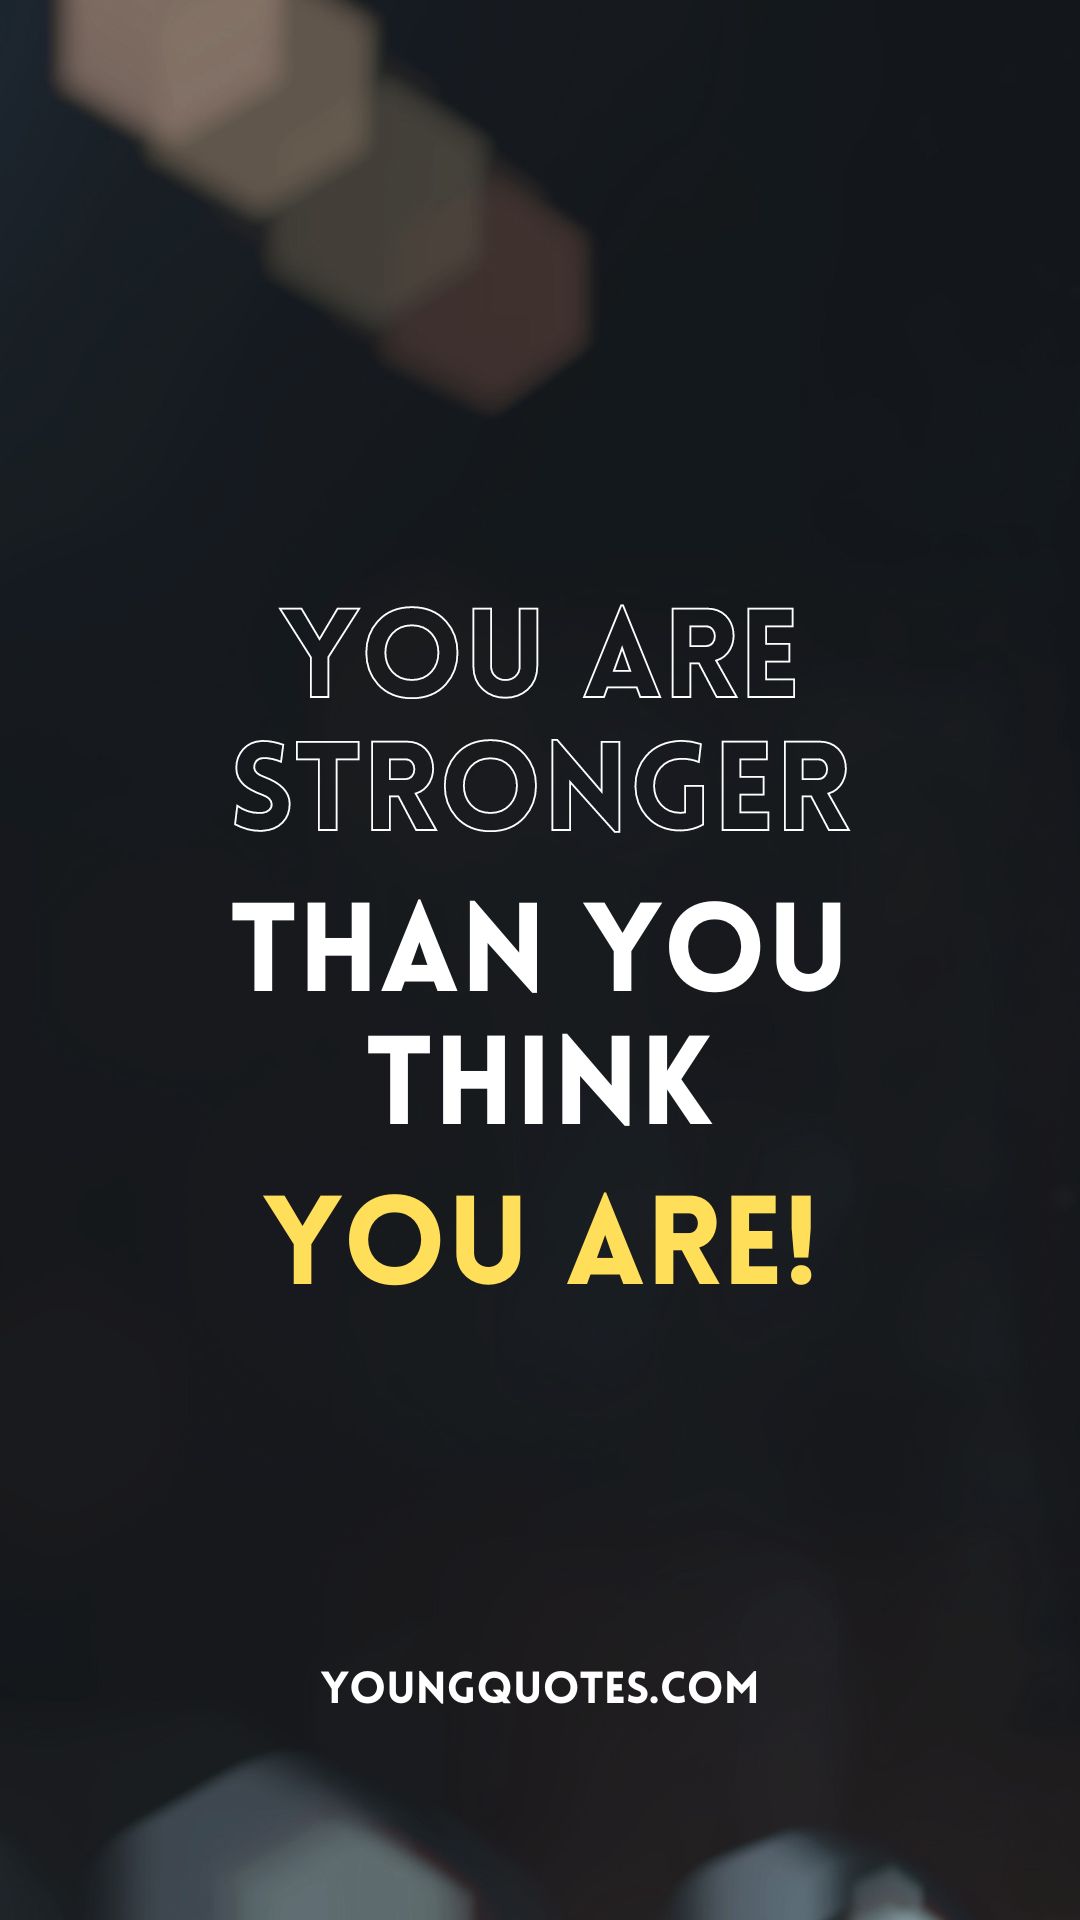 You are stronger than you think you are